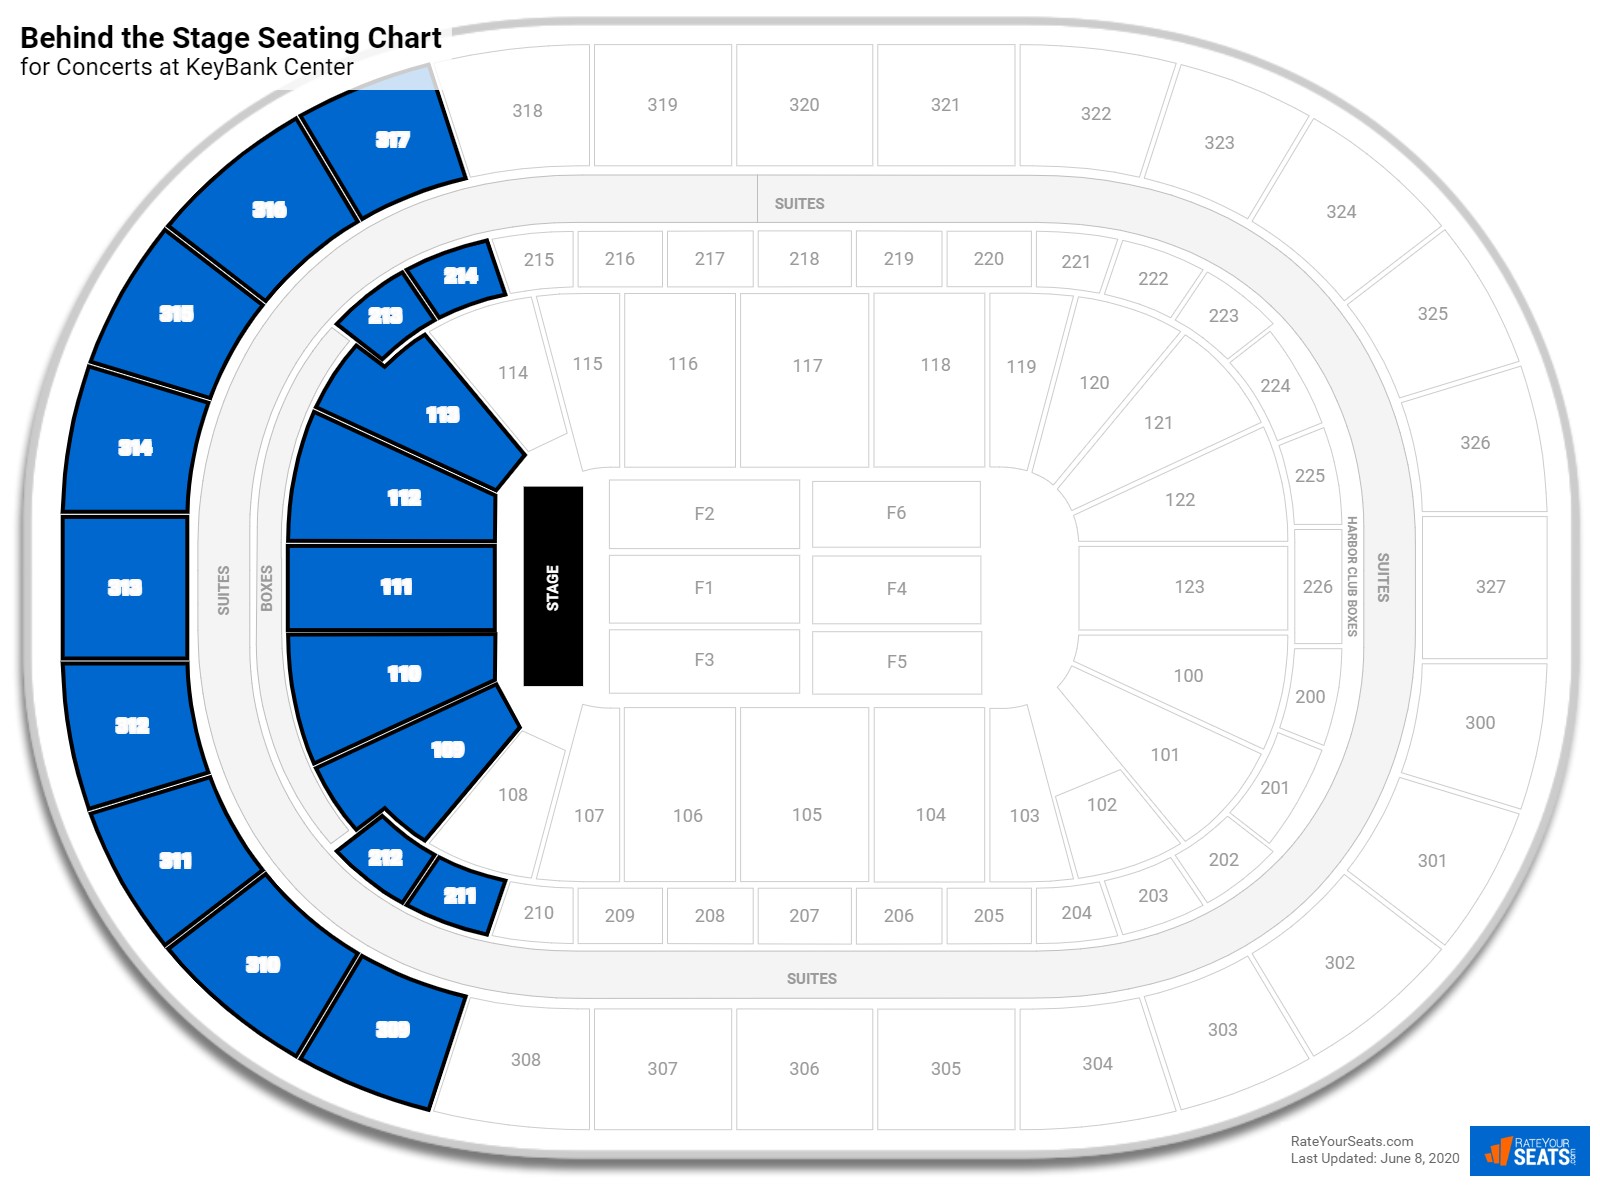 Keybank Center Seating For Concerts